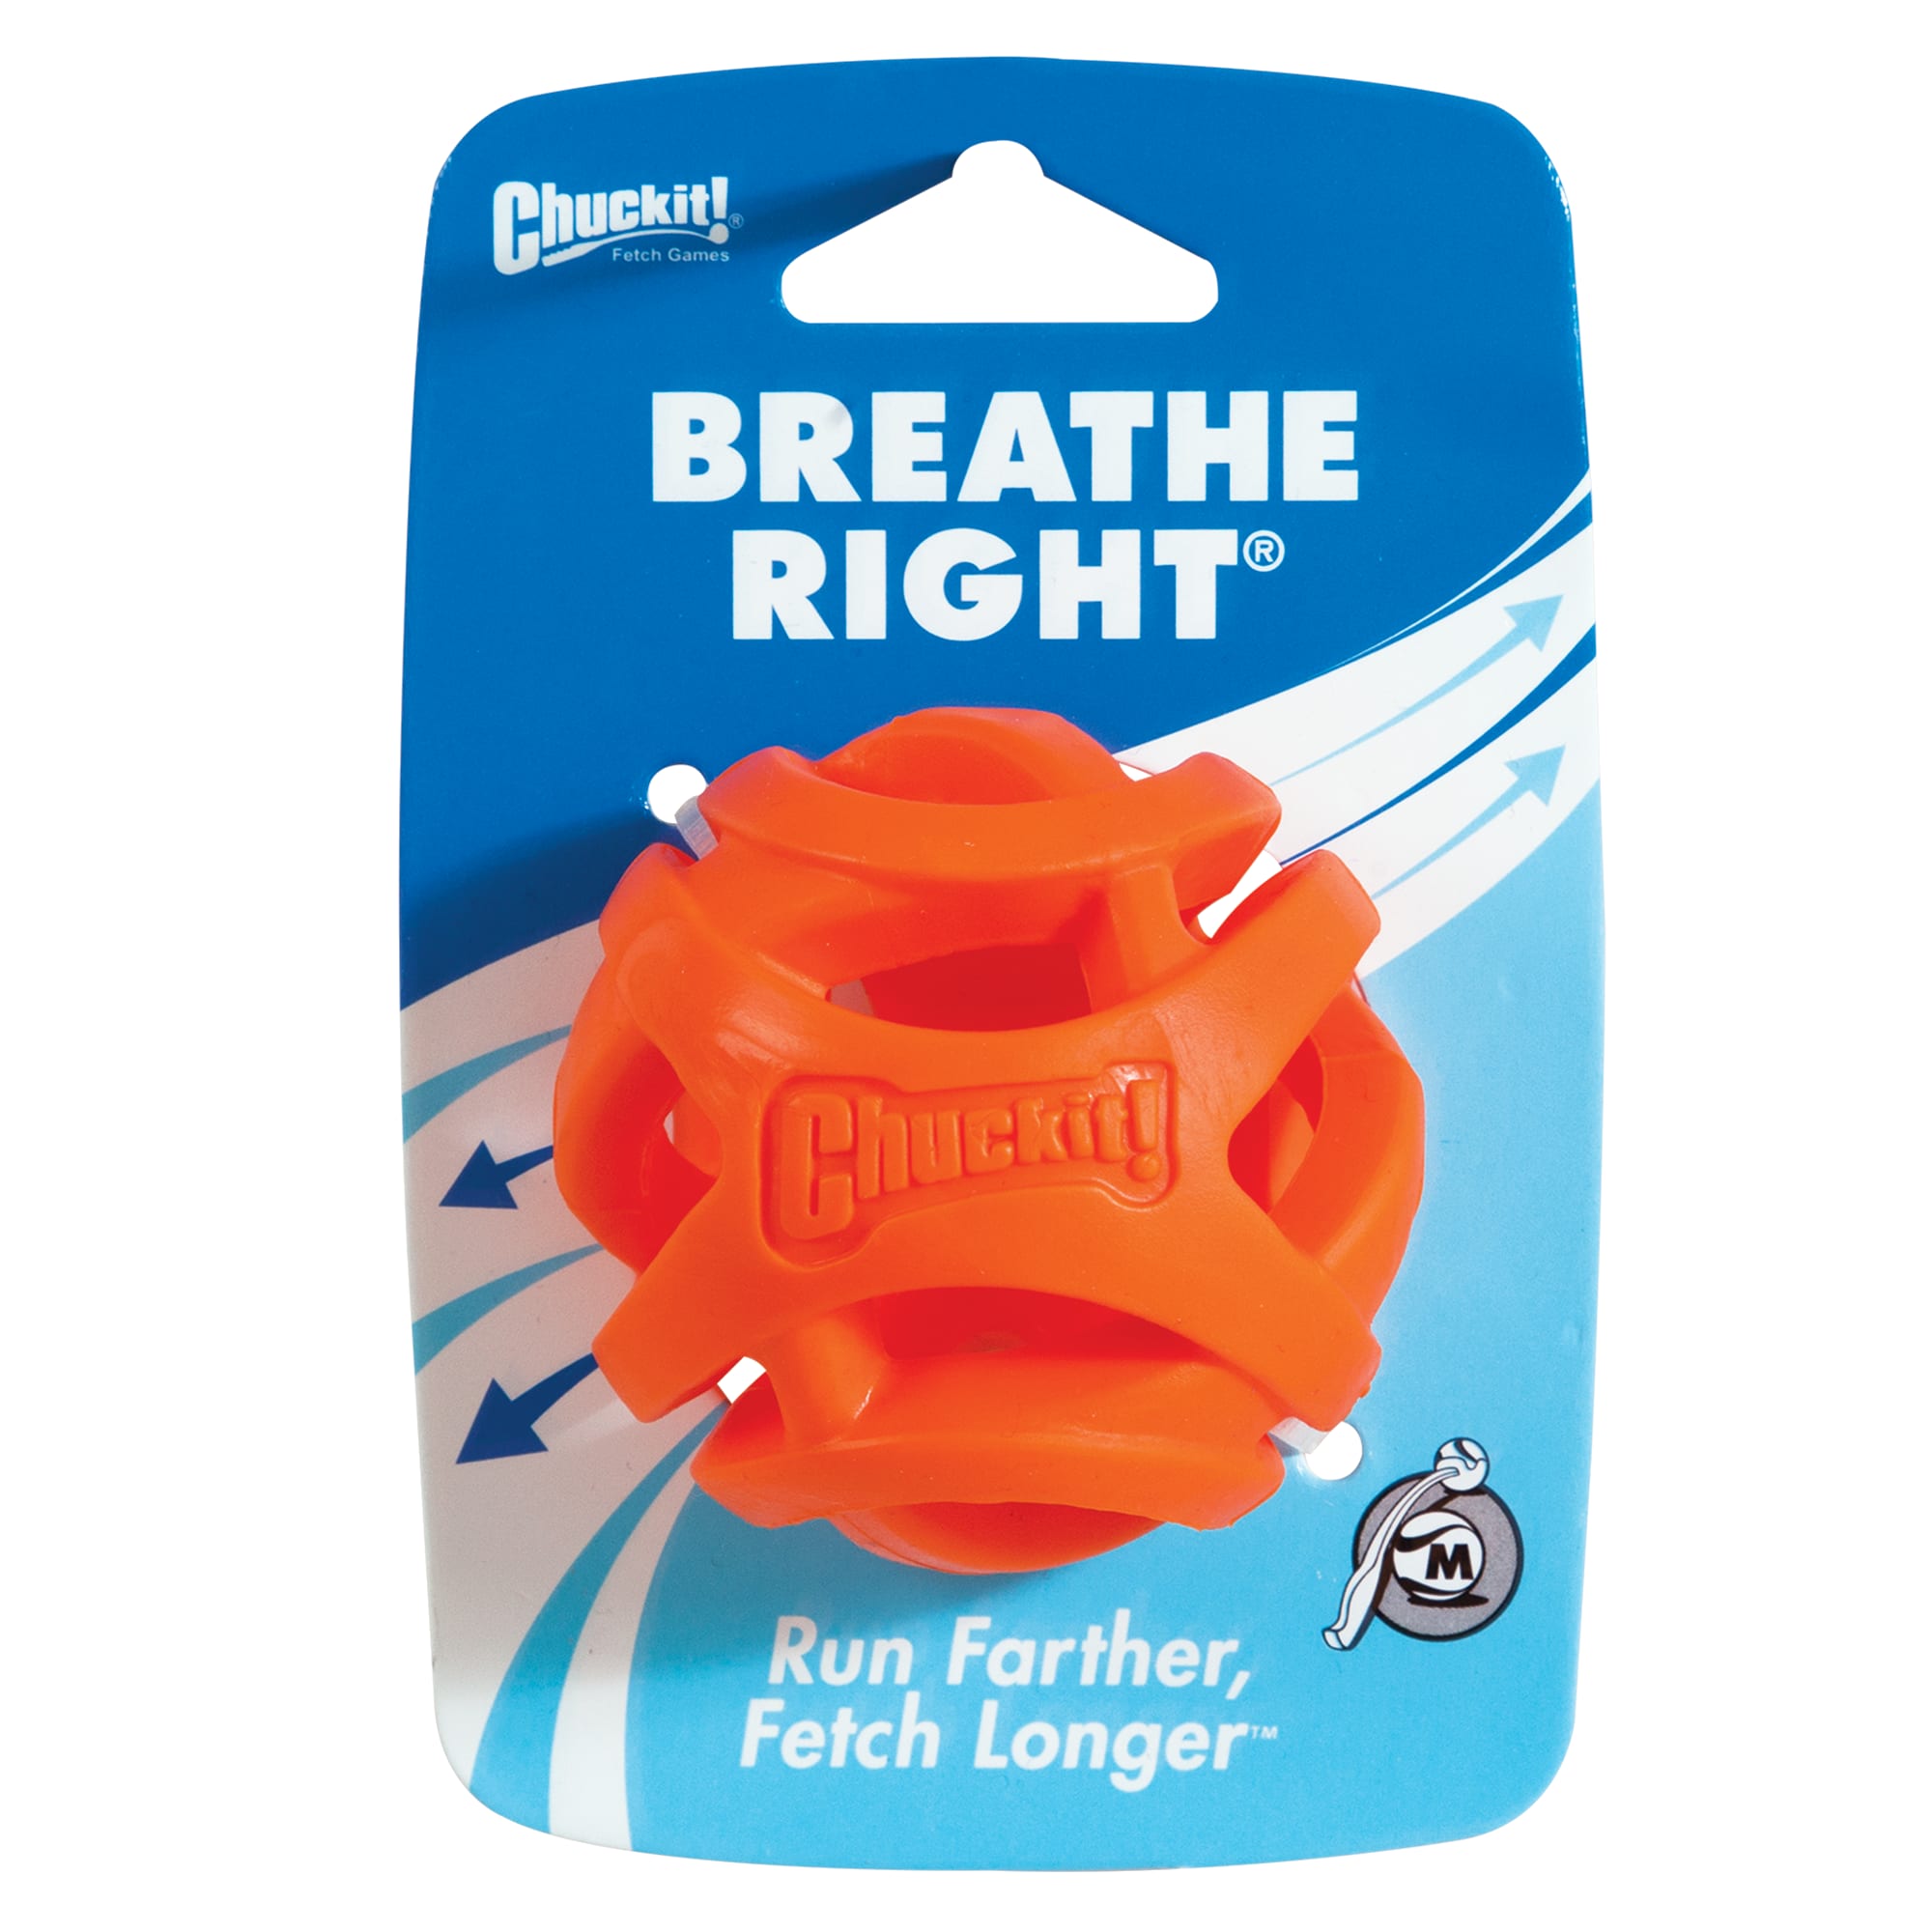 Breathe Right Chuckit Breathe Right Fetch Stick Large Durable Throw Fetch Interactive Toy 29695322150 